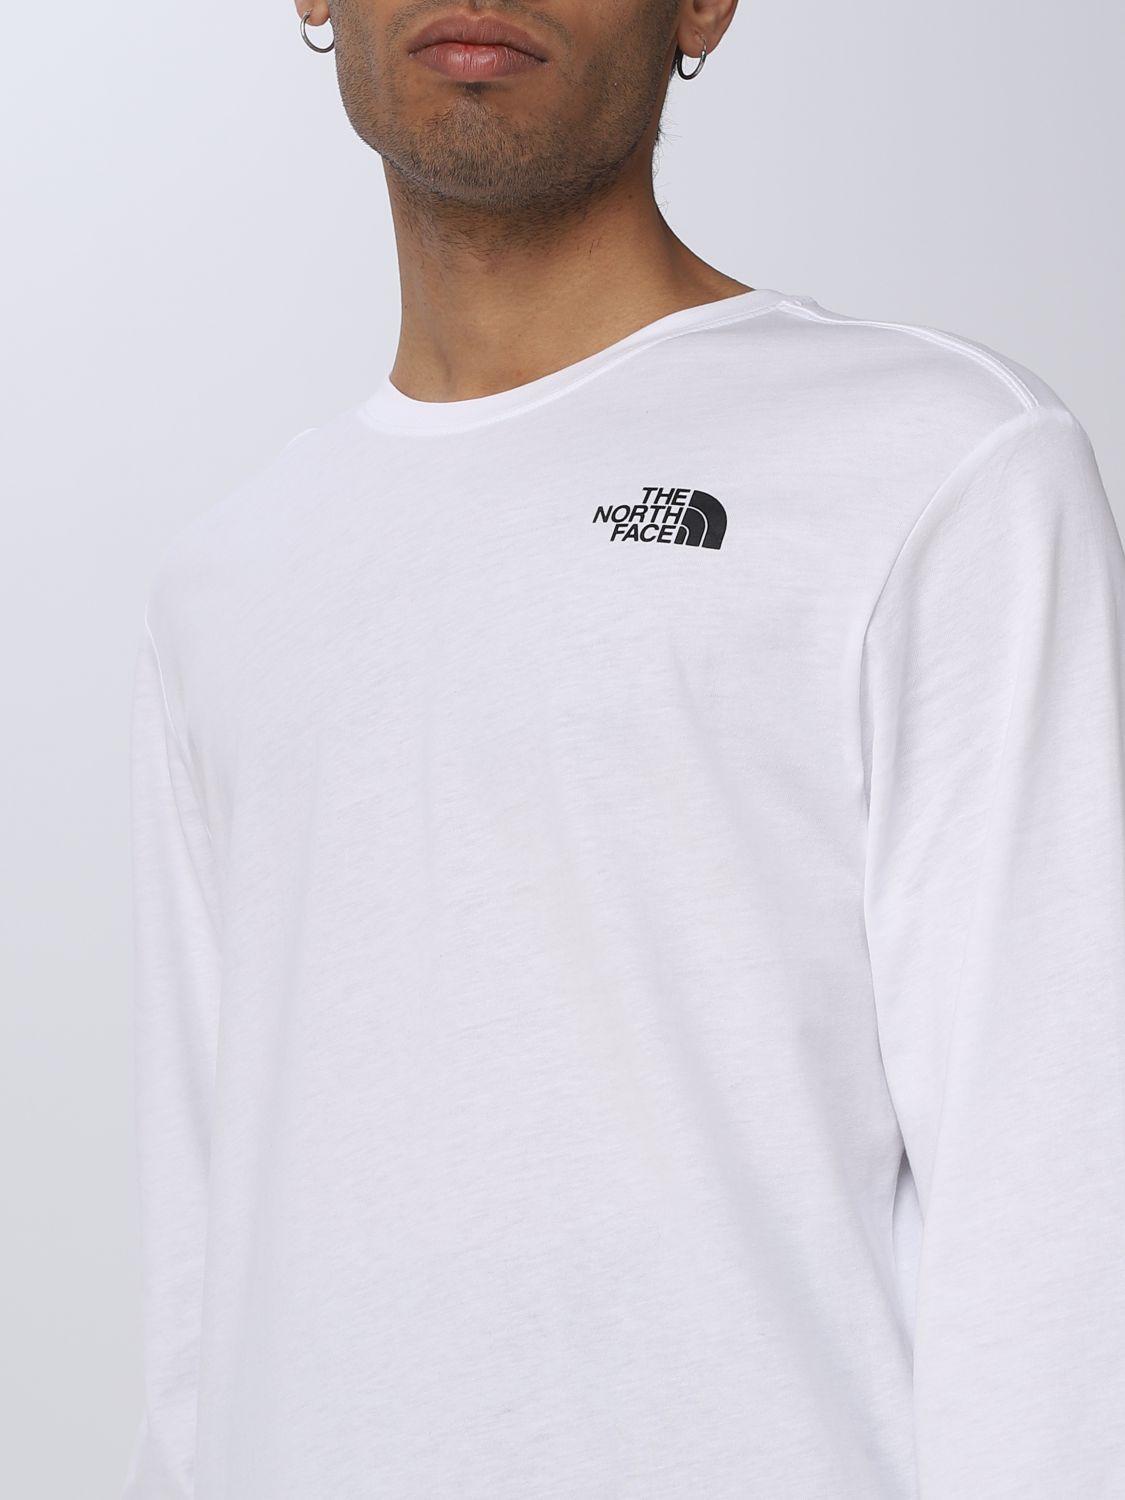 T-Shirt The North Face: The North Face Herren T-Shirt weiß 4